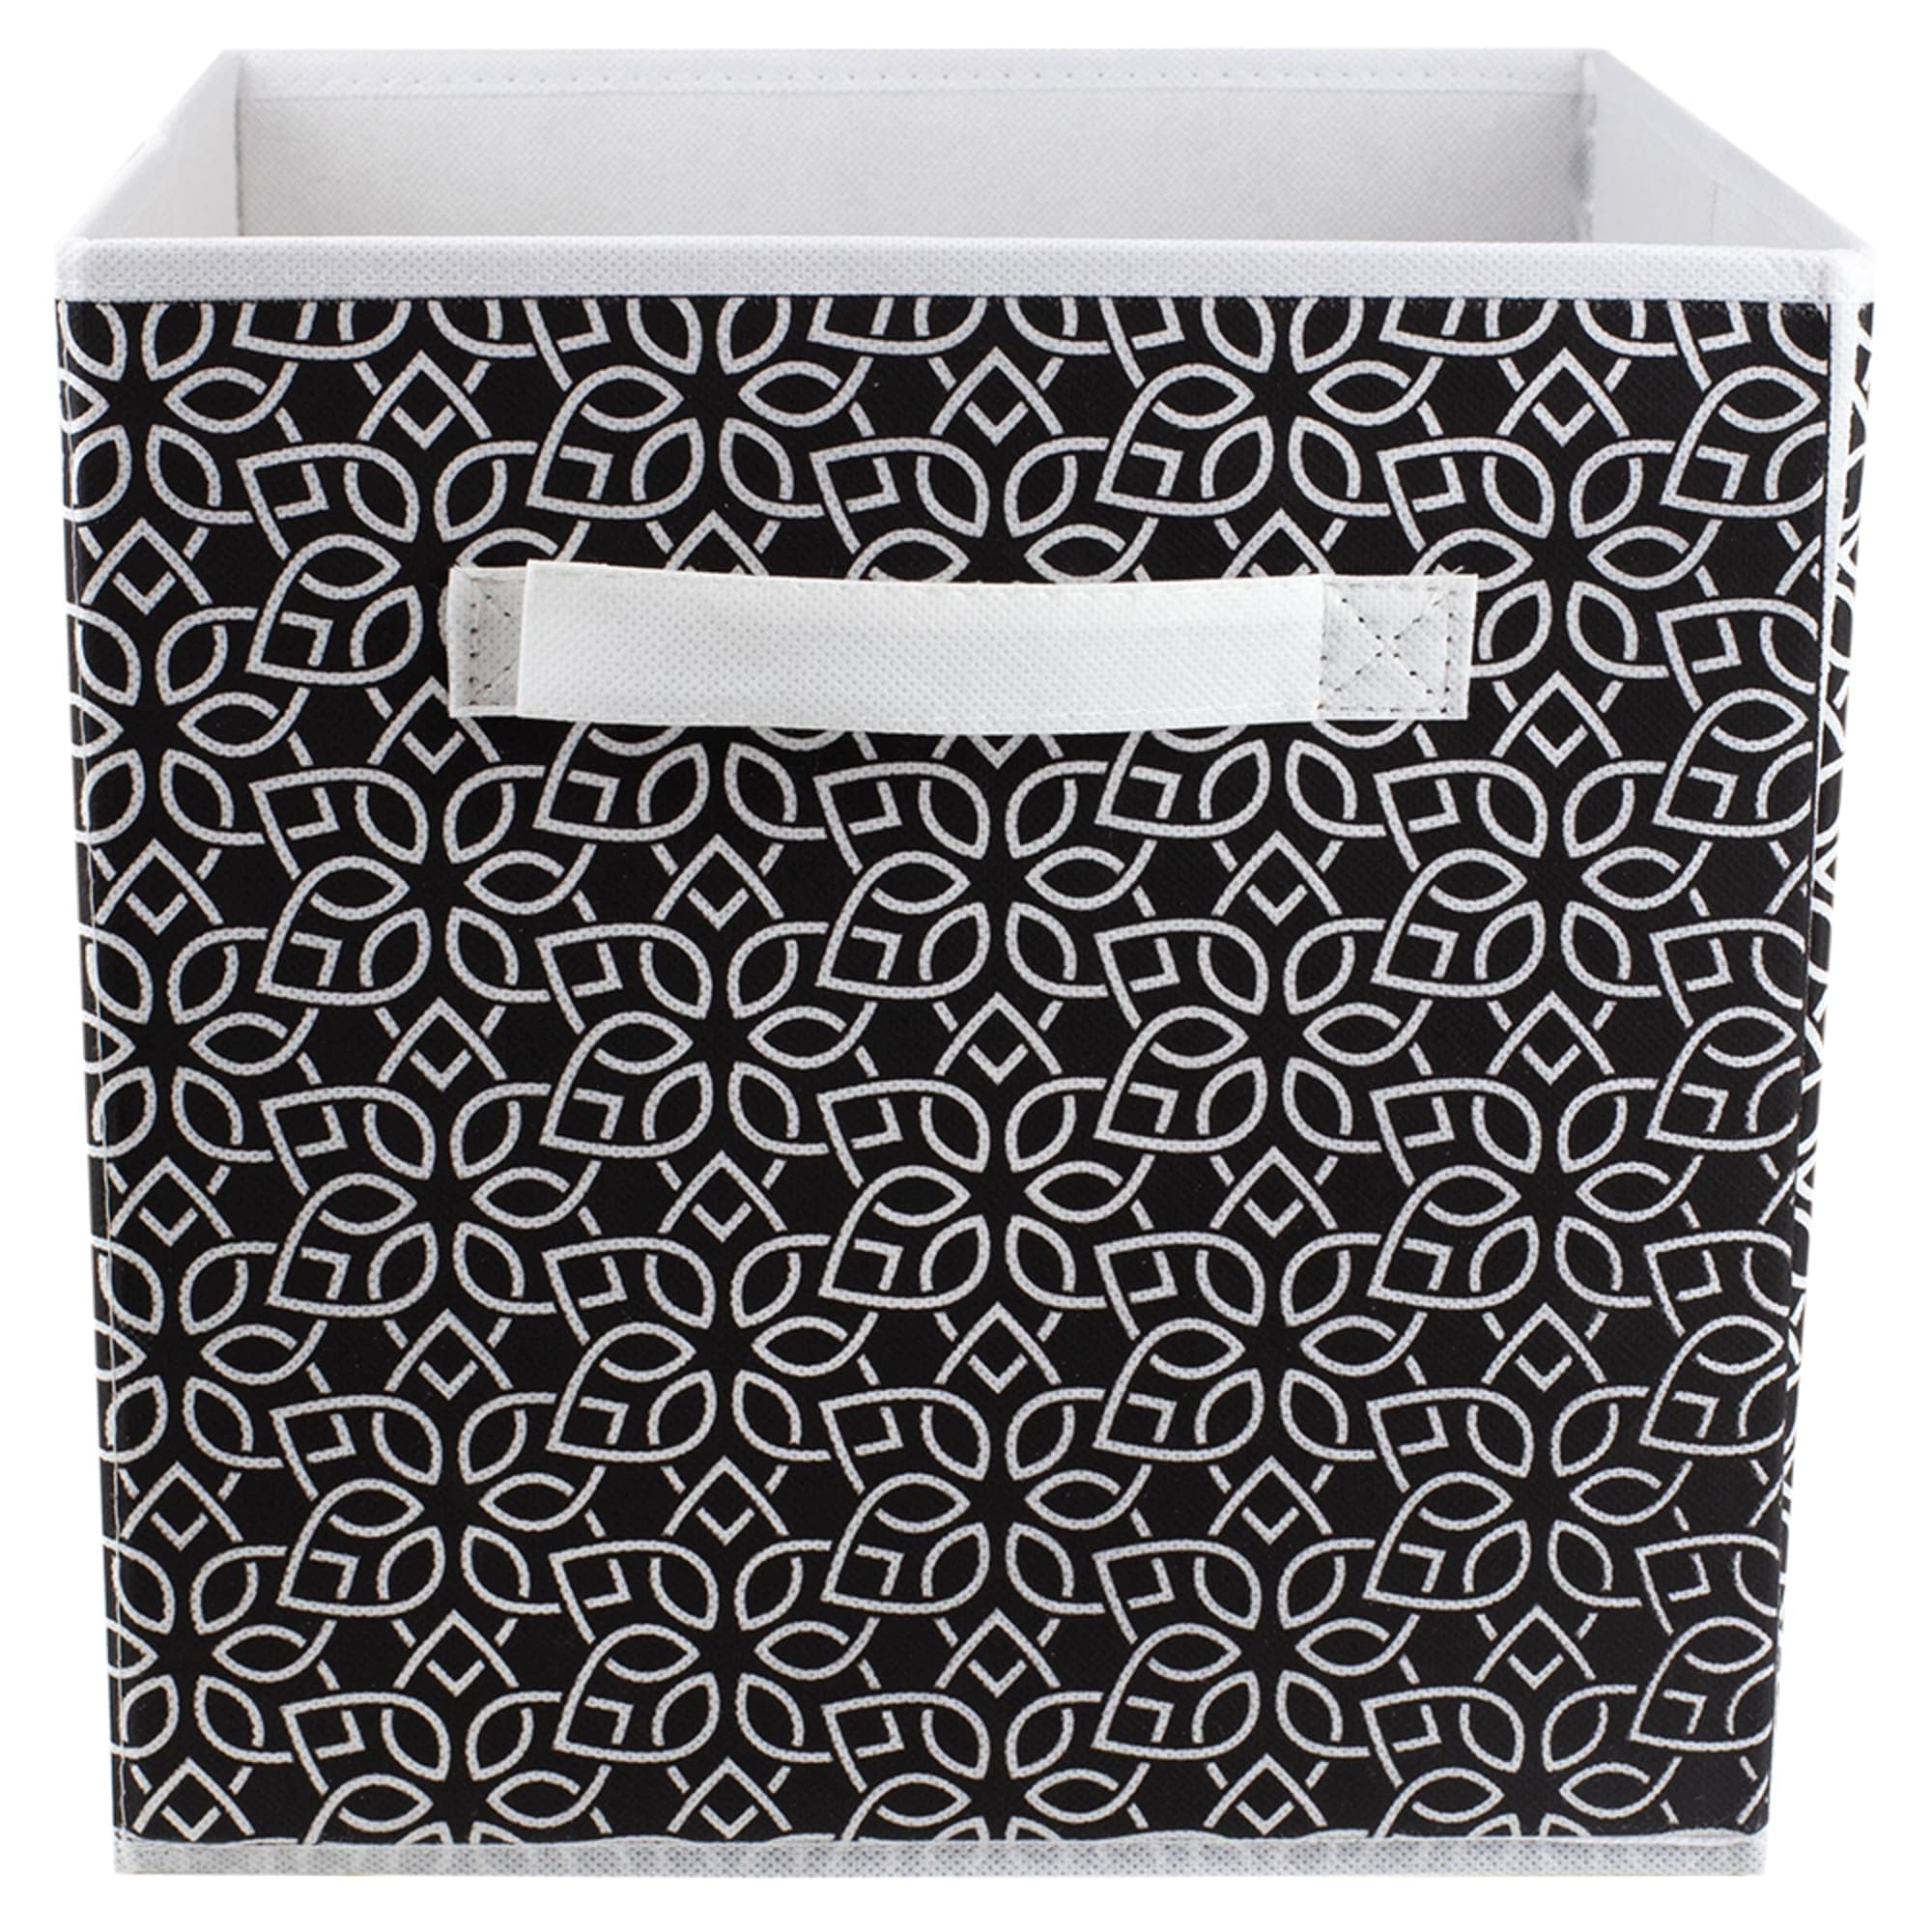 Home Basics Blossom Collapsible Non-Woven Storage Cube, Black $3.00 EACH, CASE PACK OF 12